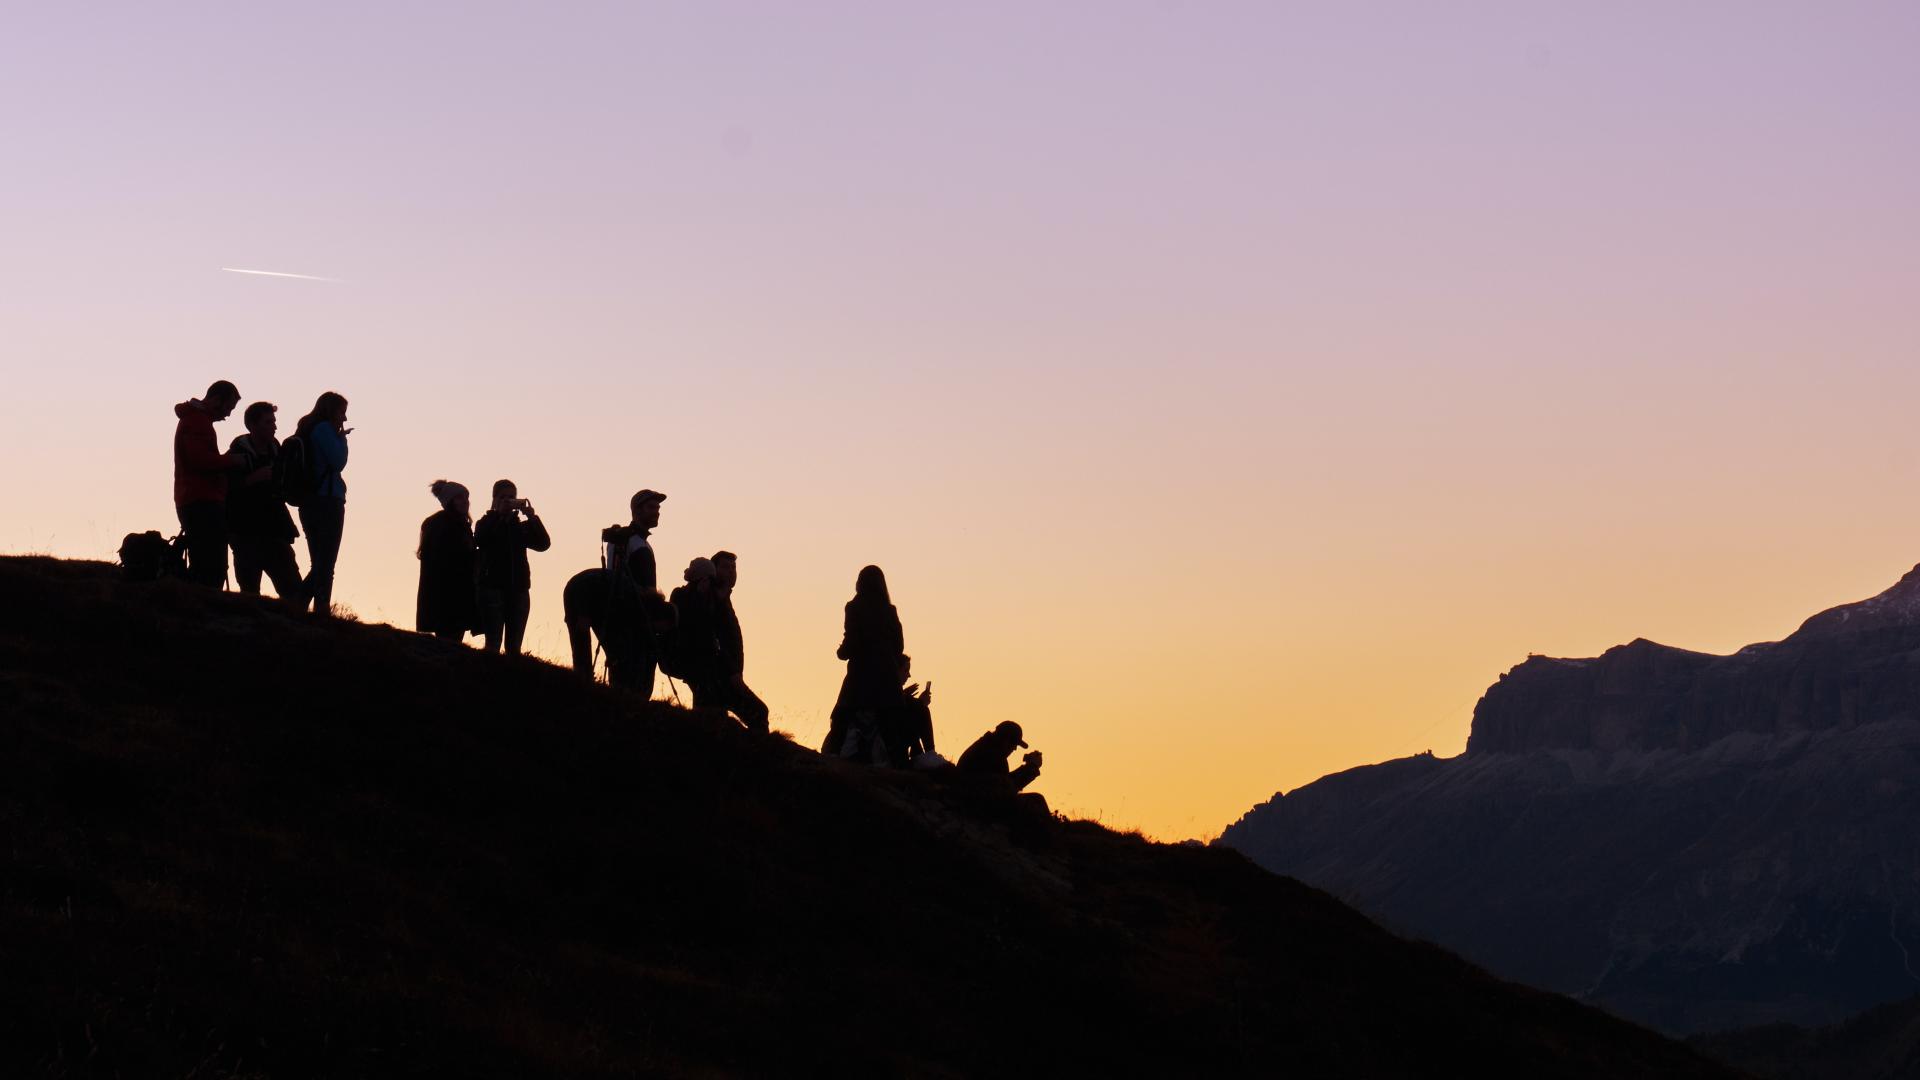 A group of people on a hill silhouetted against the setting sun